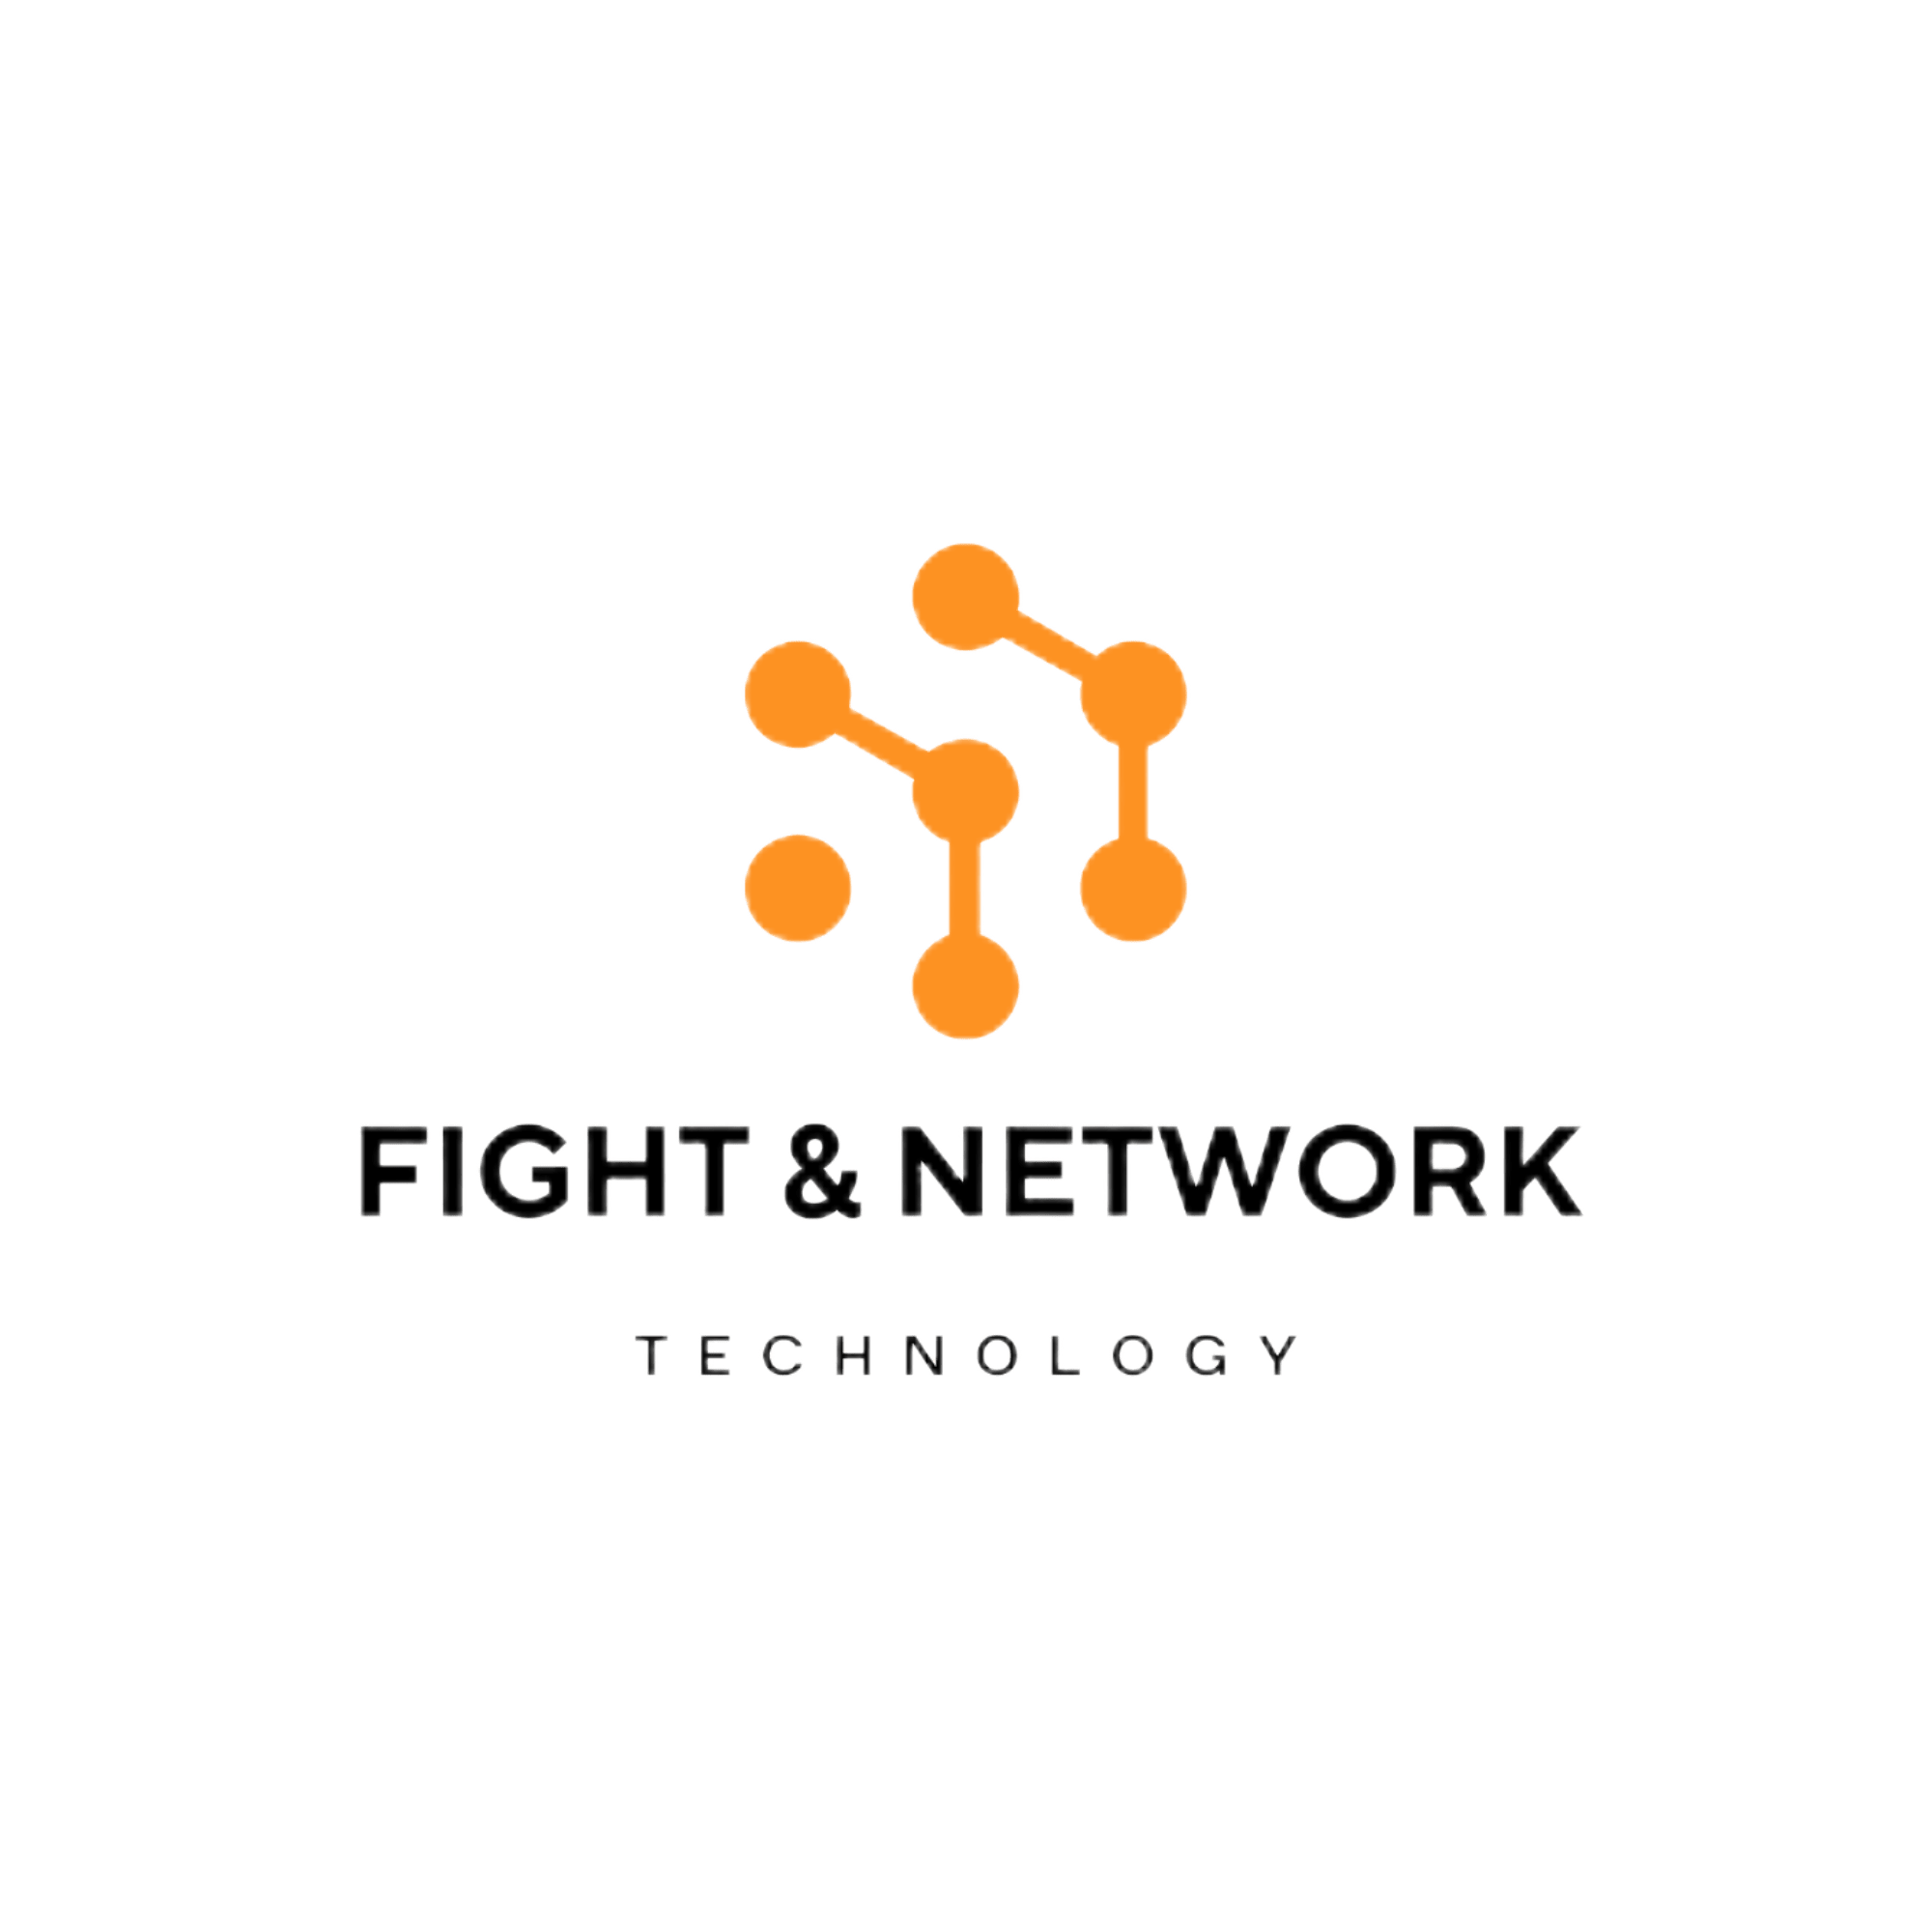 Fight & Network